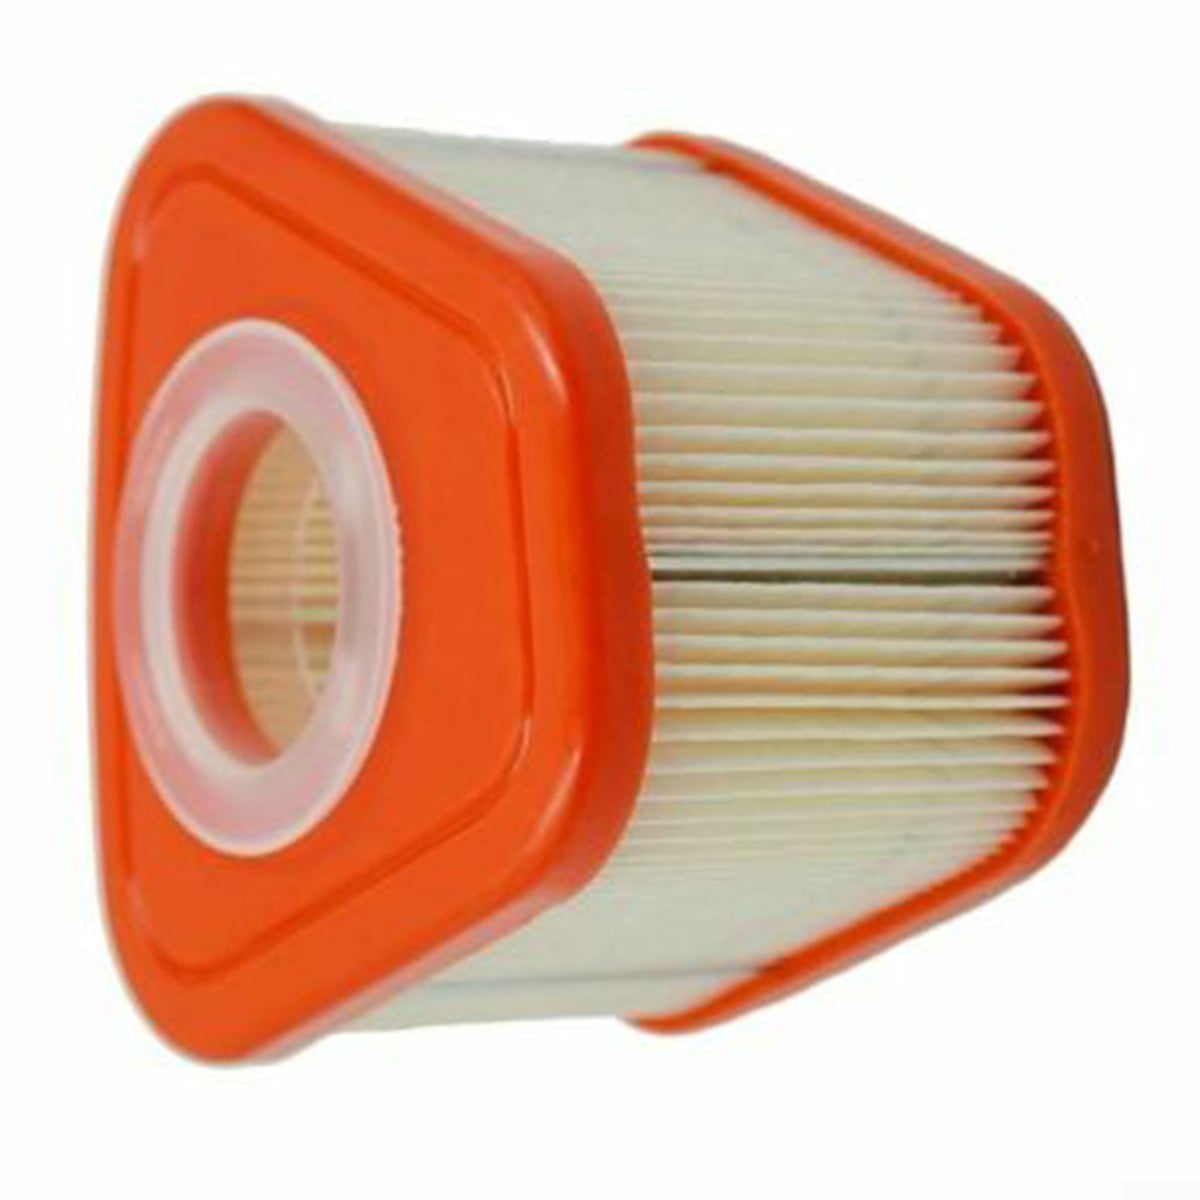 Briggs and Stratton Genuine 595853 597265 Air Filter OEM Replacement Part 